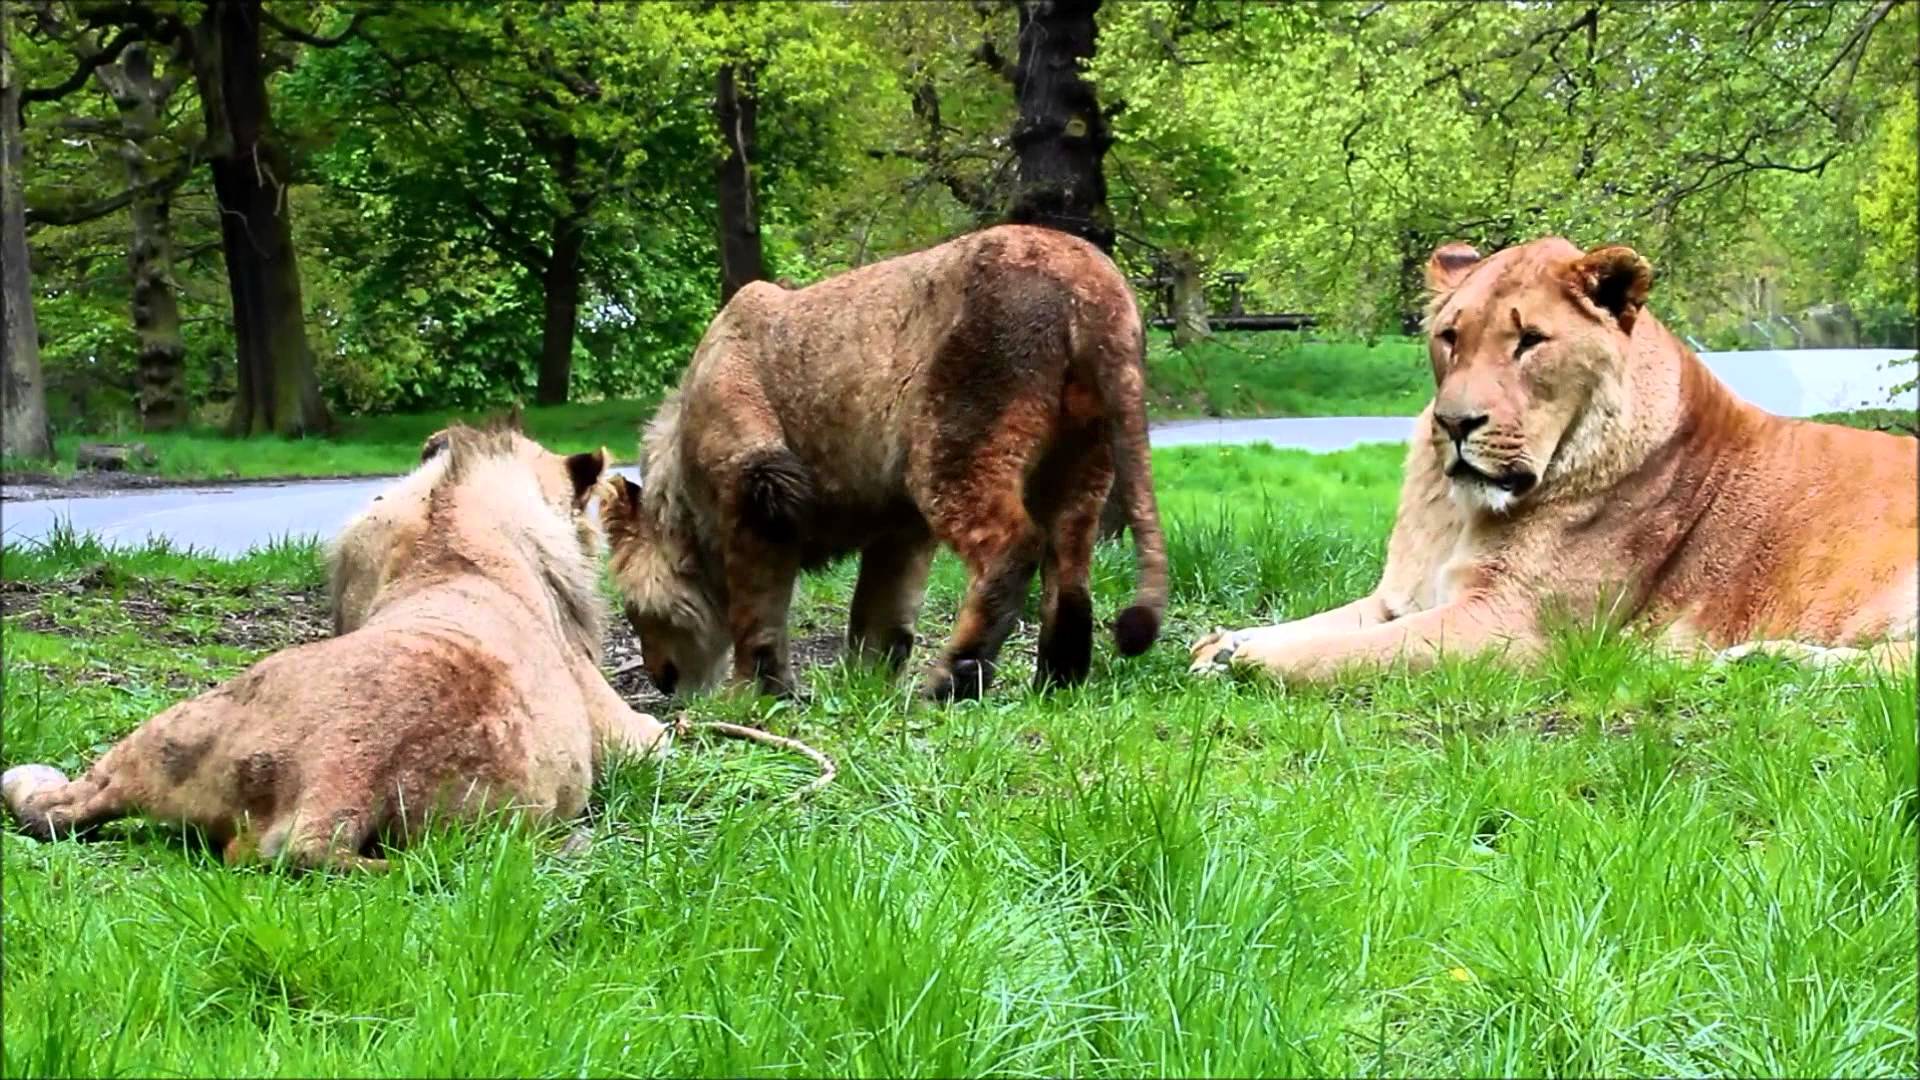 Knowsley Safari Park - African Lions & cubs - YouTube